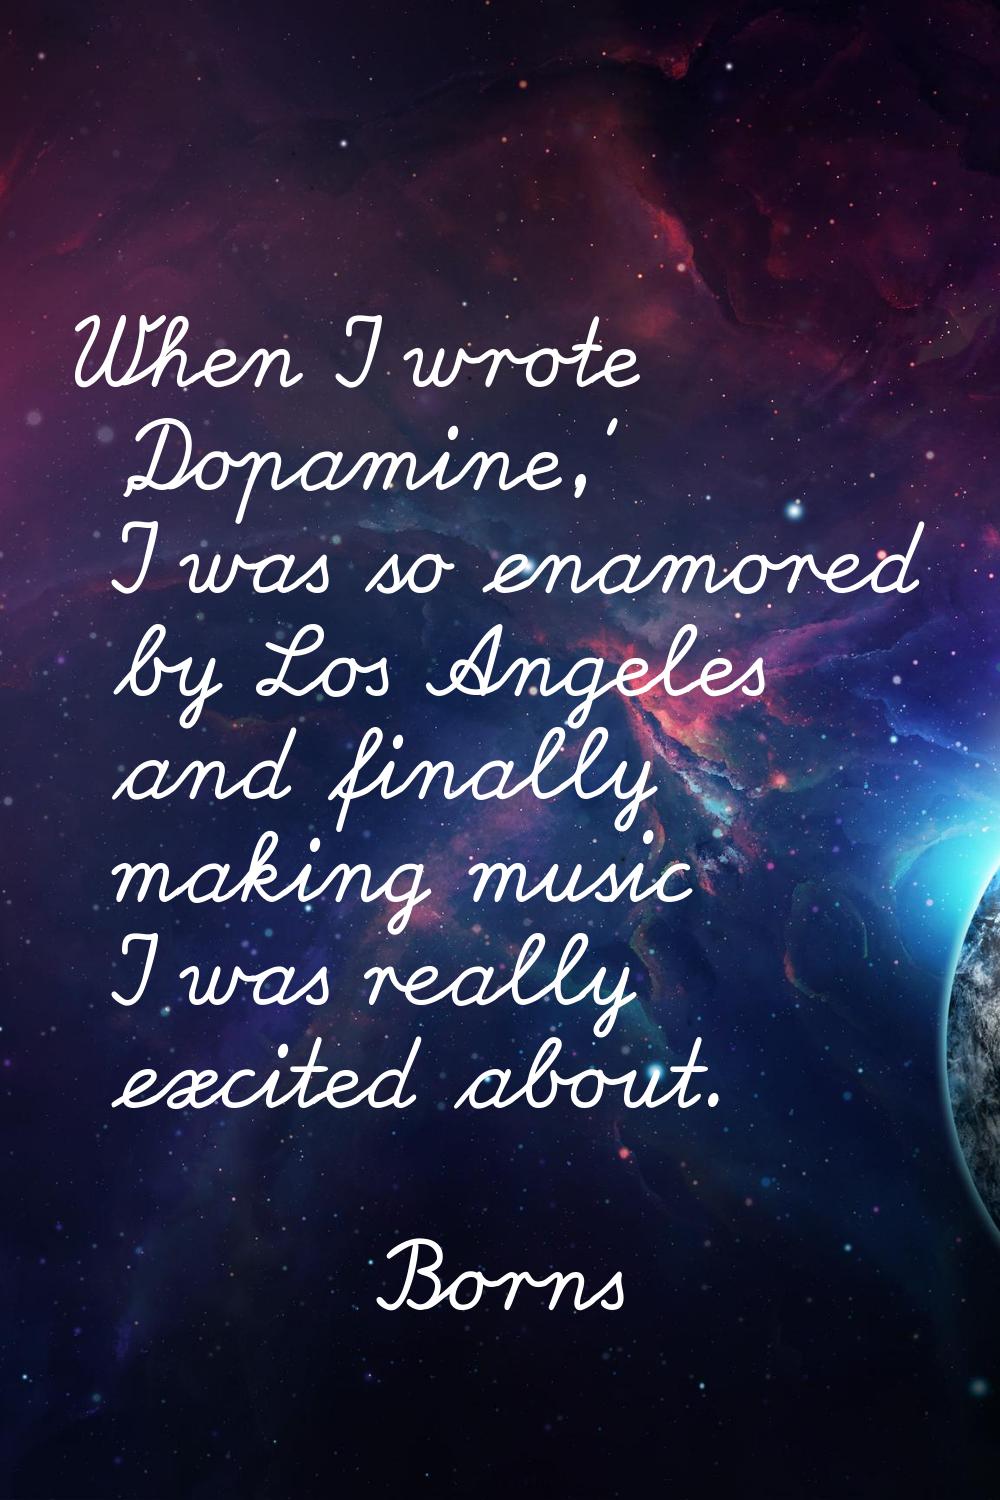 When I wrote 'Dopamine,' I was so enamored by Los Angeles and finally making music I was really exc